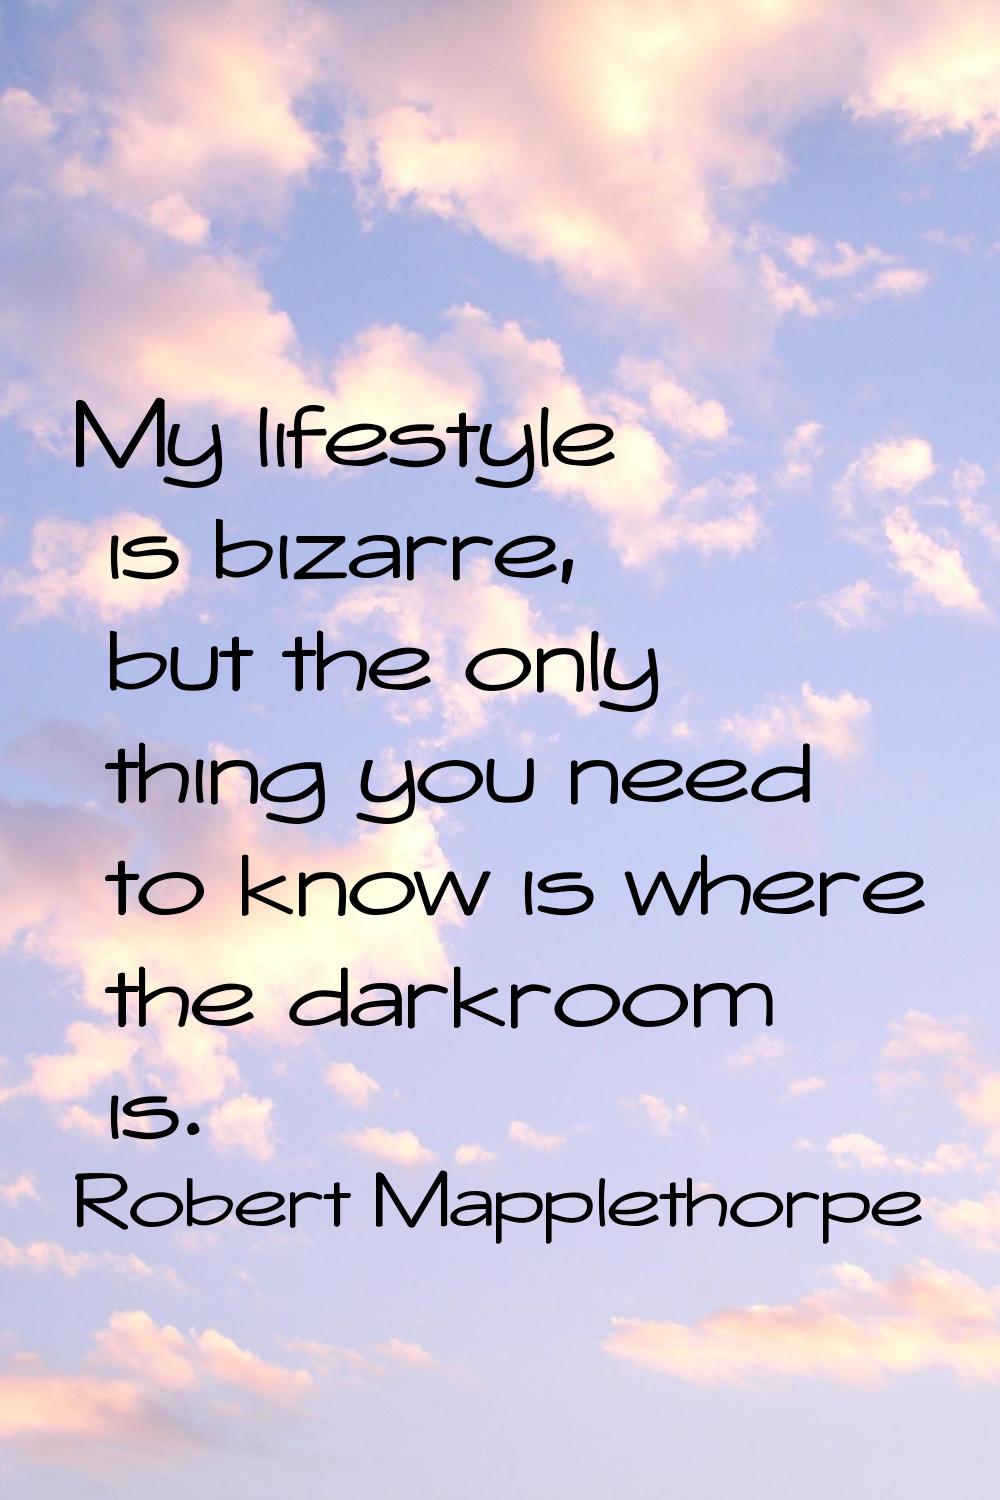 My lifestyle is bizarre, but the only thing you need to know is where the darkroom is.